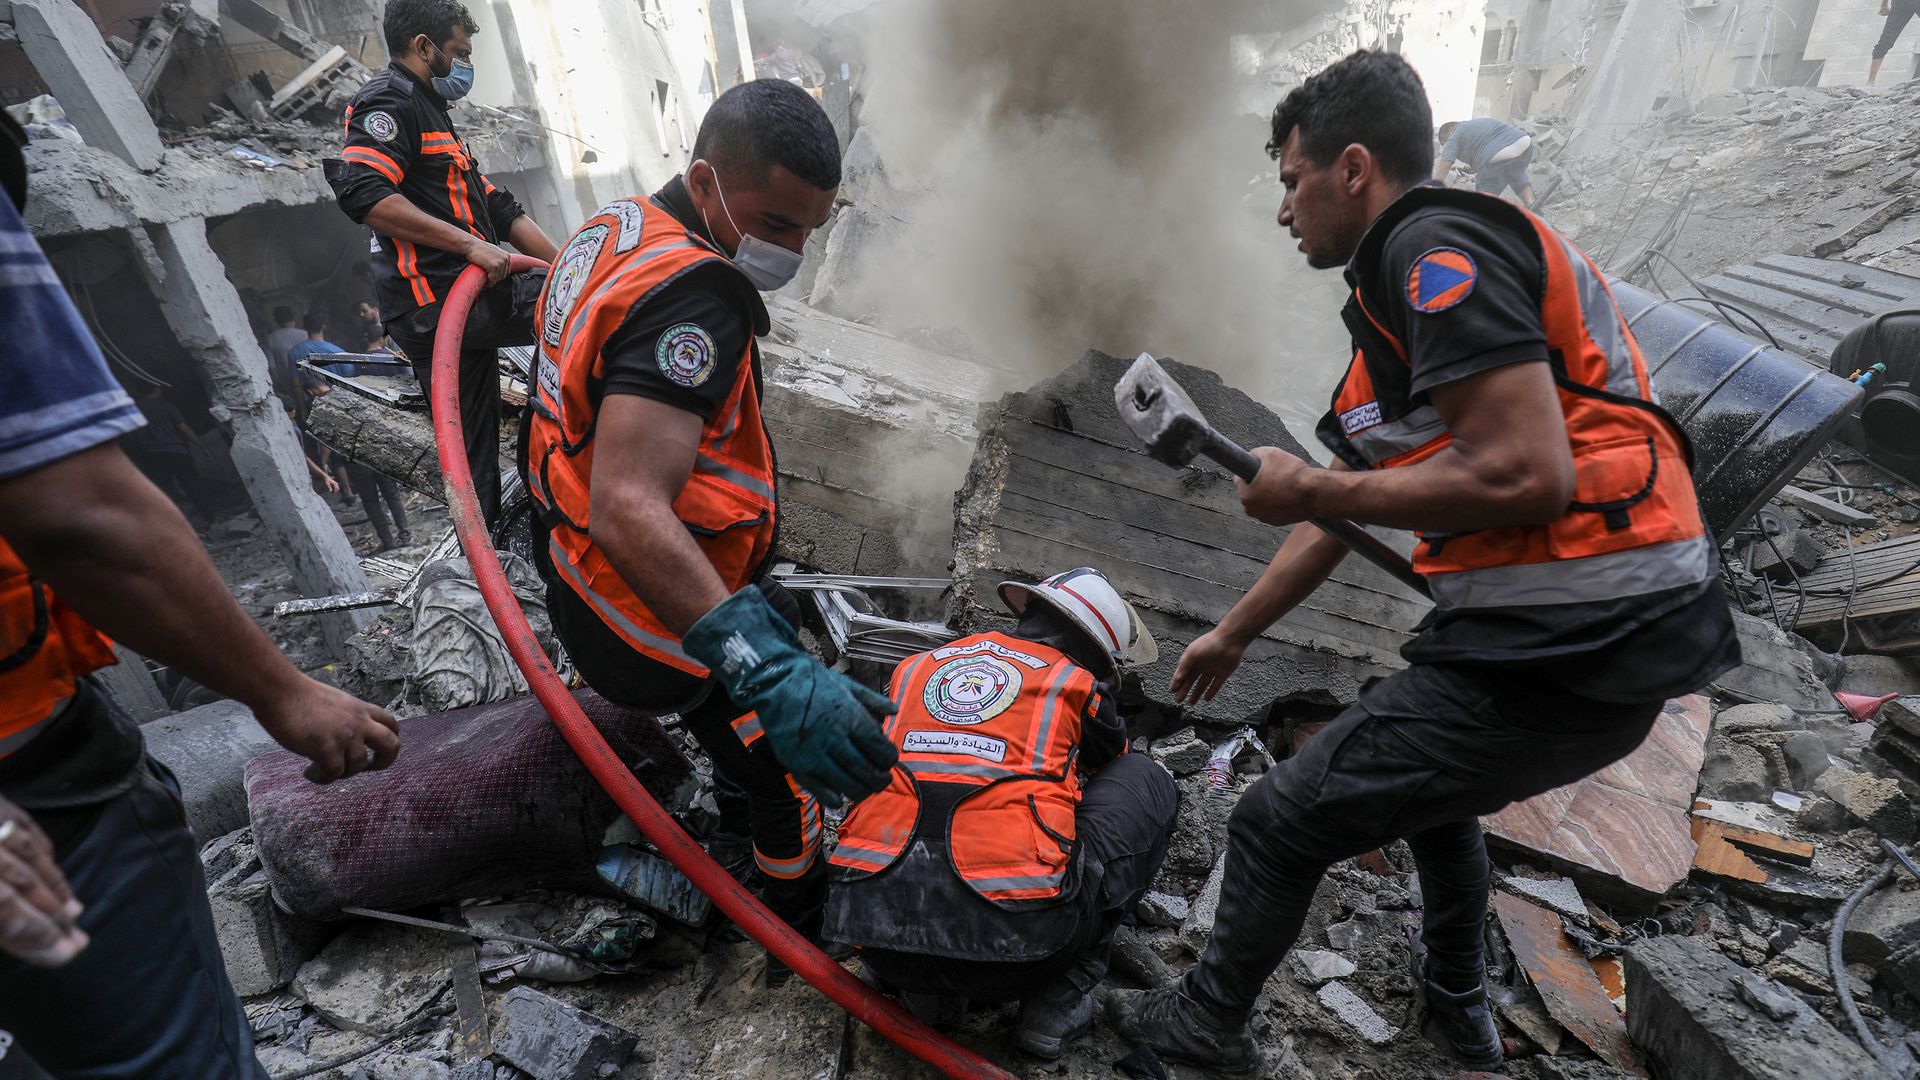 Civil defense teams and residents launch a search and rescue operation around the buildings that were destroyed after Israel's attacks on the Gaza Strip. Photo: Abed Rahim Khatib/Anadolu via Getty Images